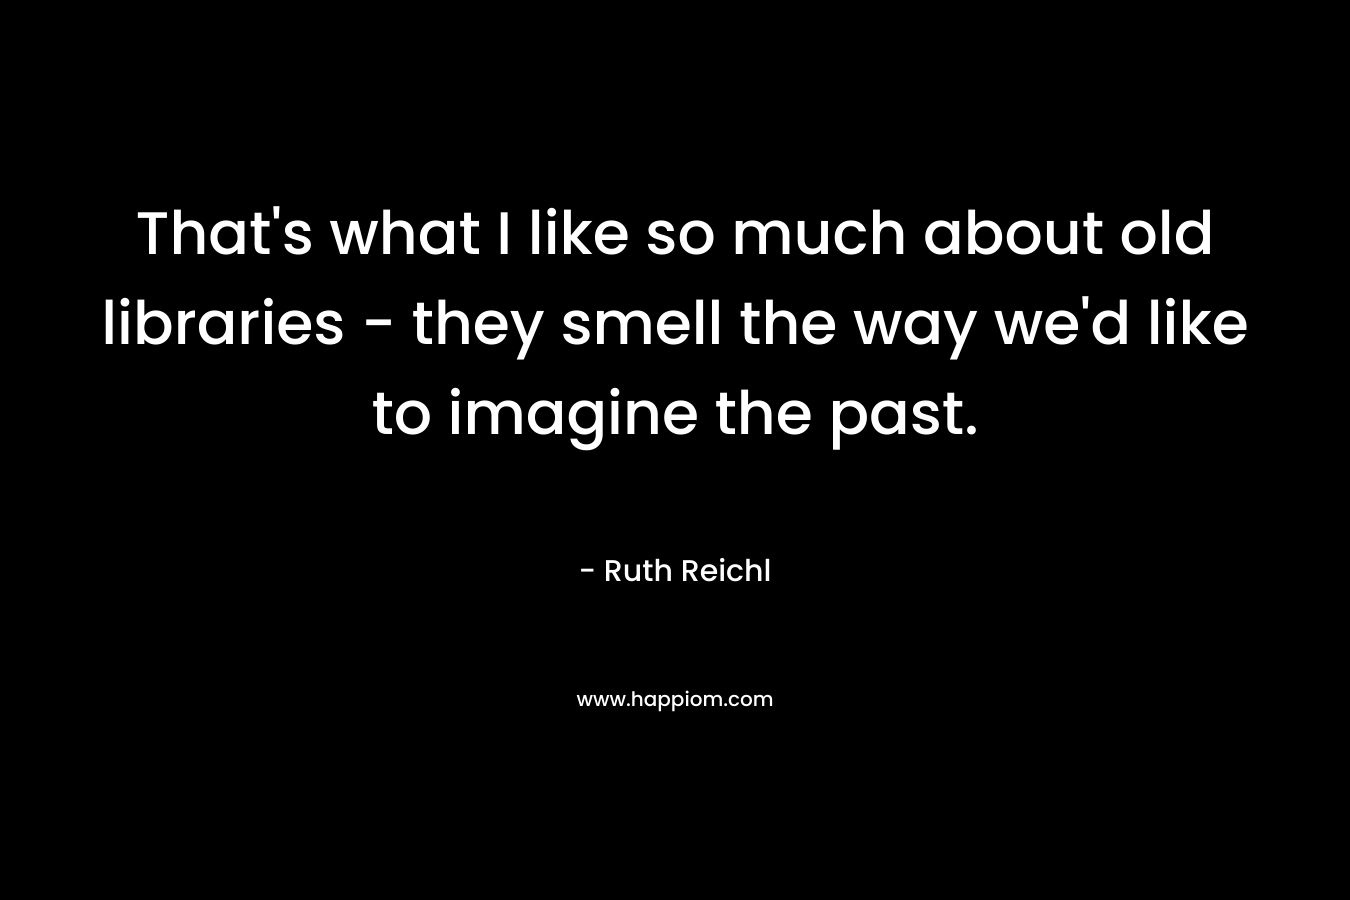 That’s what I like so much about old libraries – they smell the way we’d like to imagine the past. – Ruth Reichl